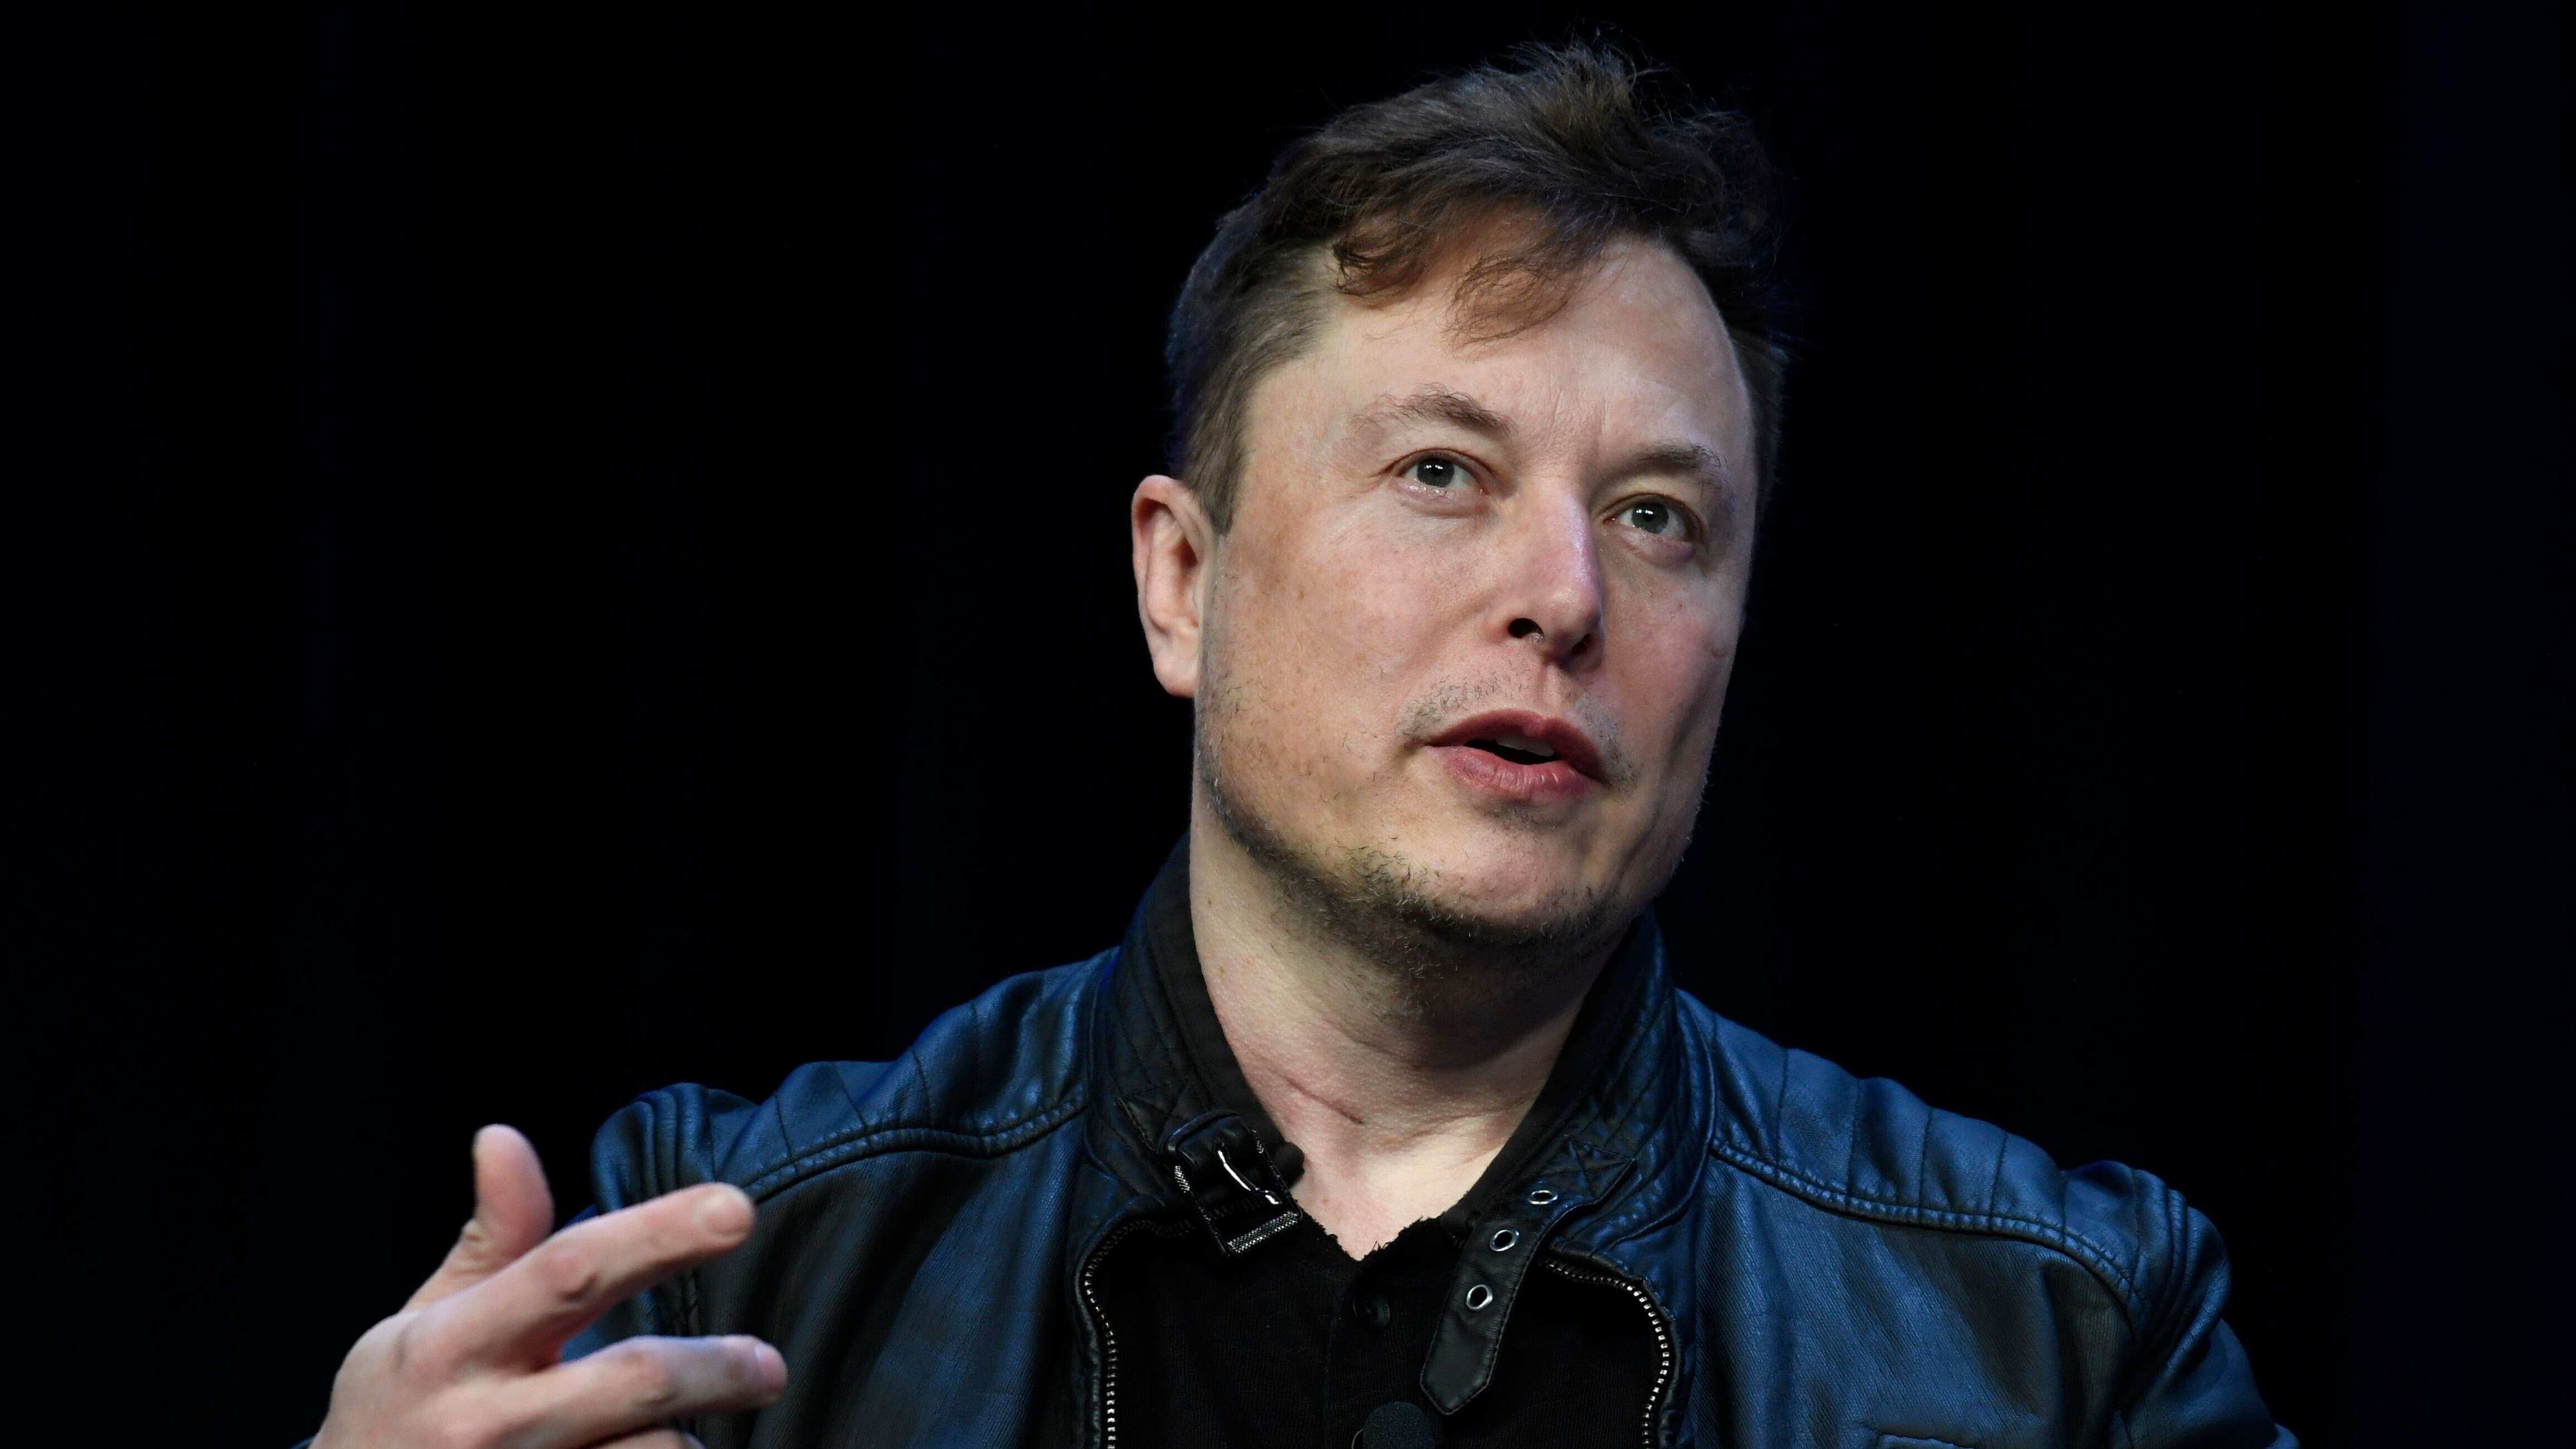 The owner of Tesla, Space X and Twitter was speaking via video link at the annual Wall Street Journal’s CEO Council Summit in London.